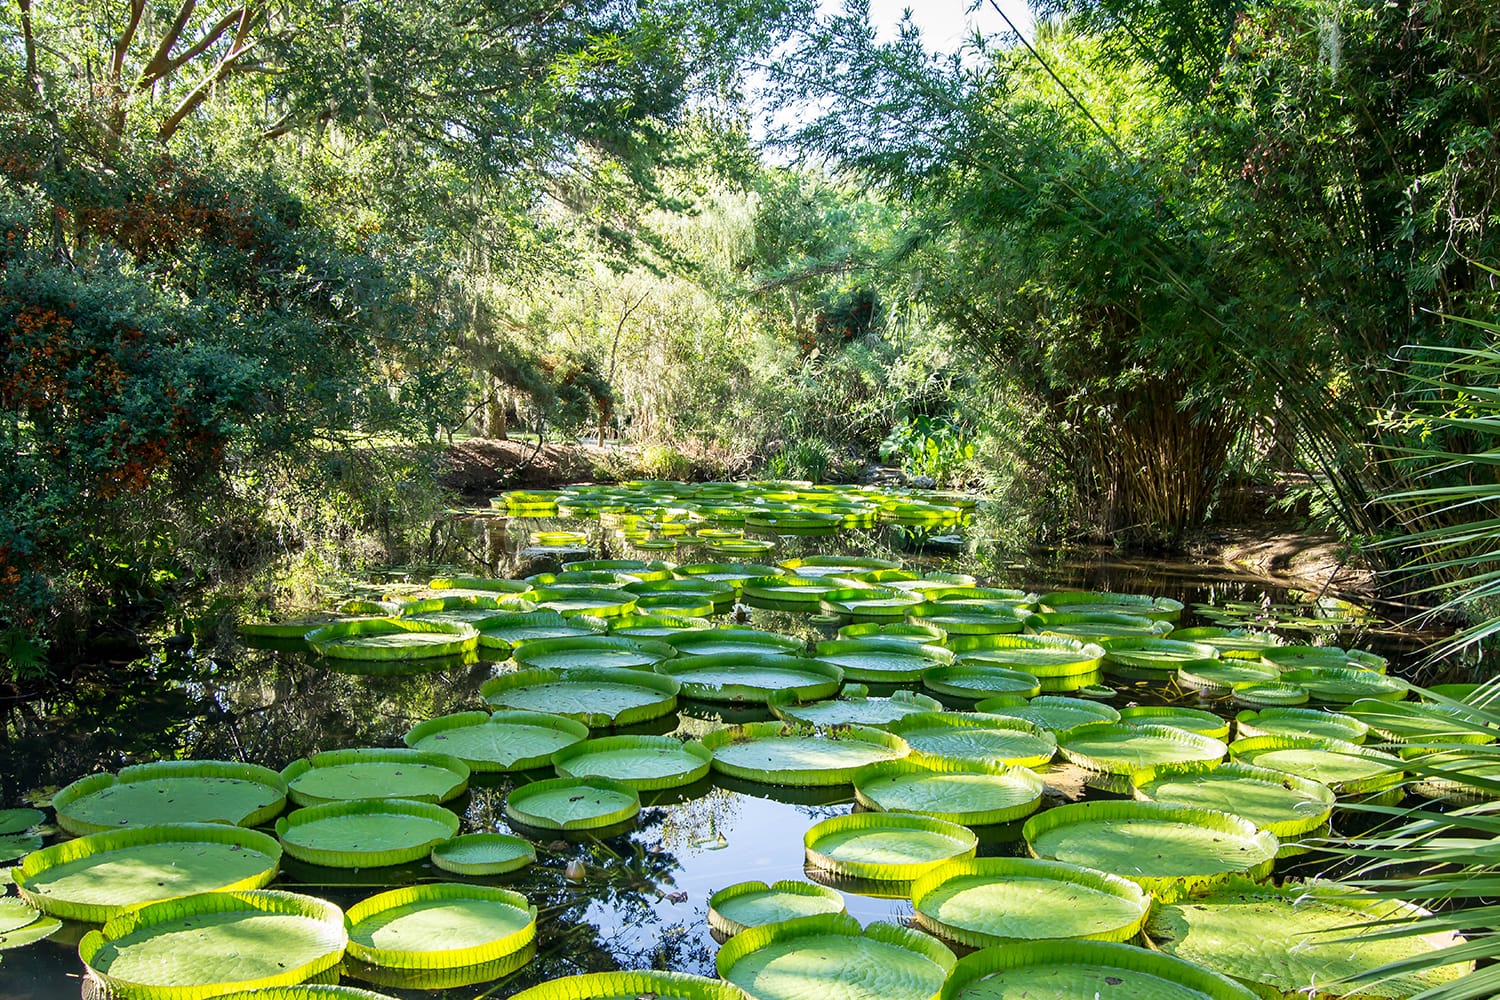 Victoria lily pads in the Kanapaha Garden, Gainesville, Florida, USA